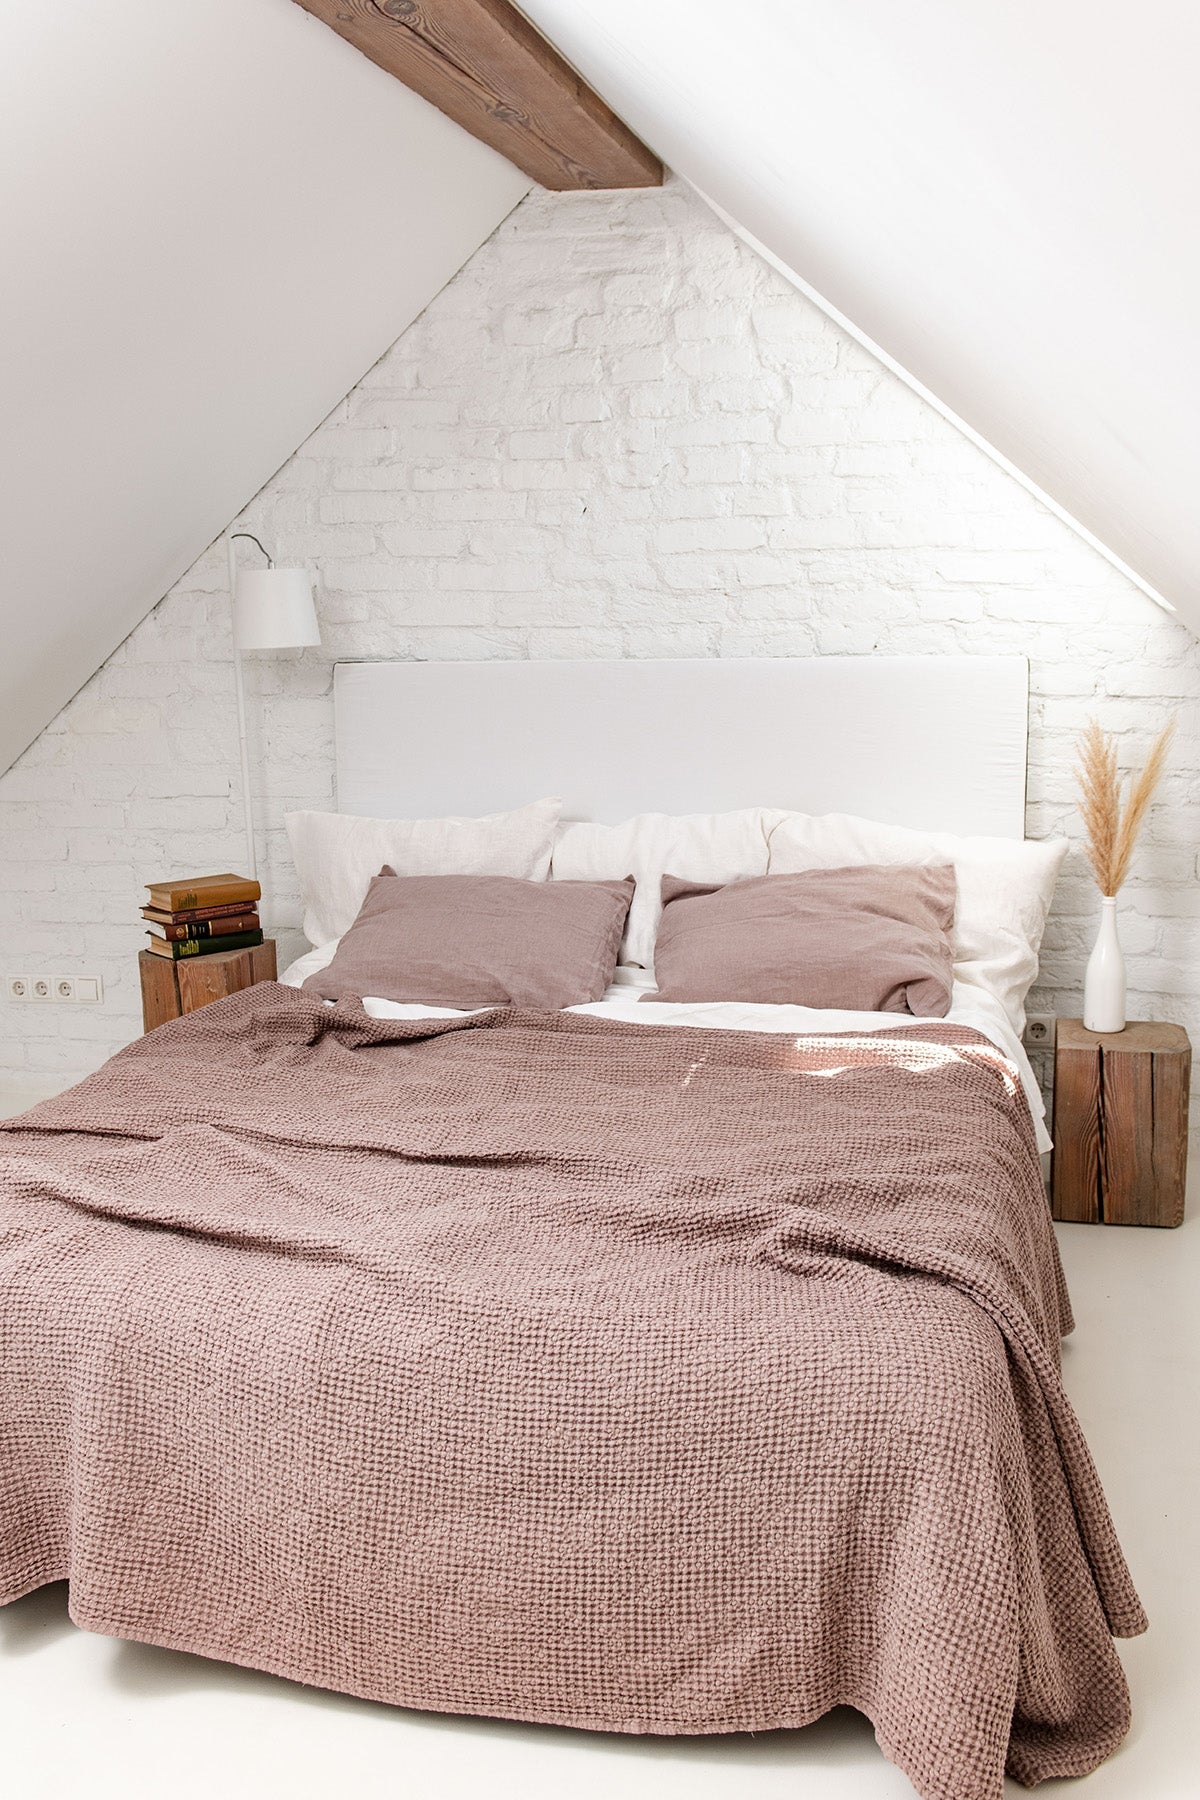 Rustic Minimal room with Linen Waffle Blanket in Rosy Brown Layed on Bed By AmourlInen